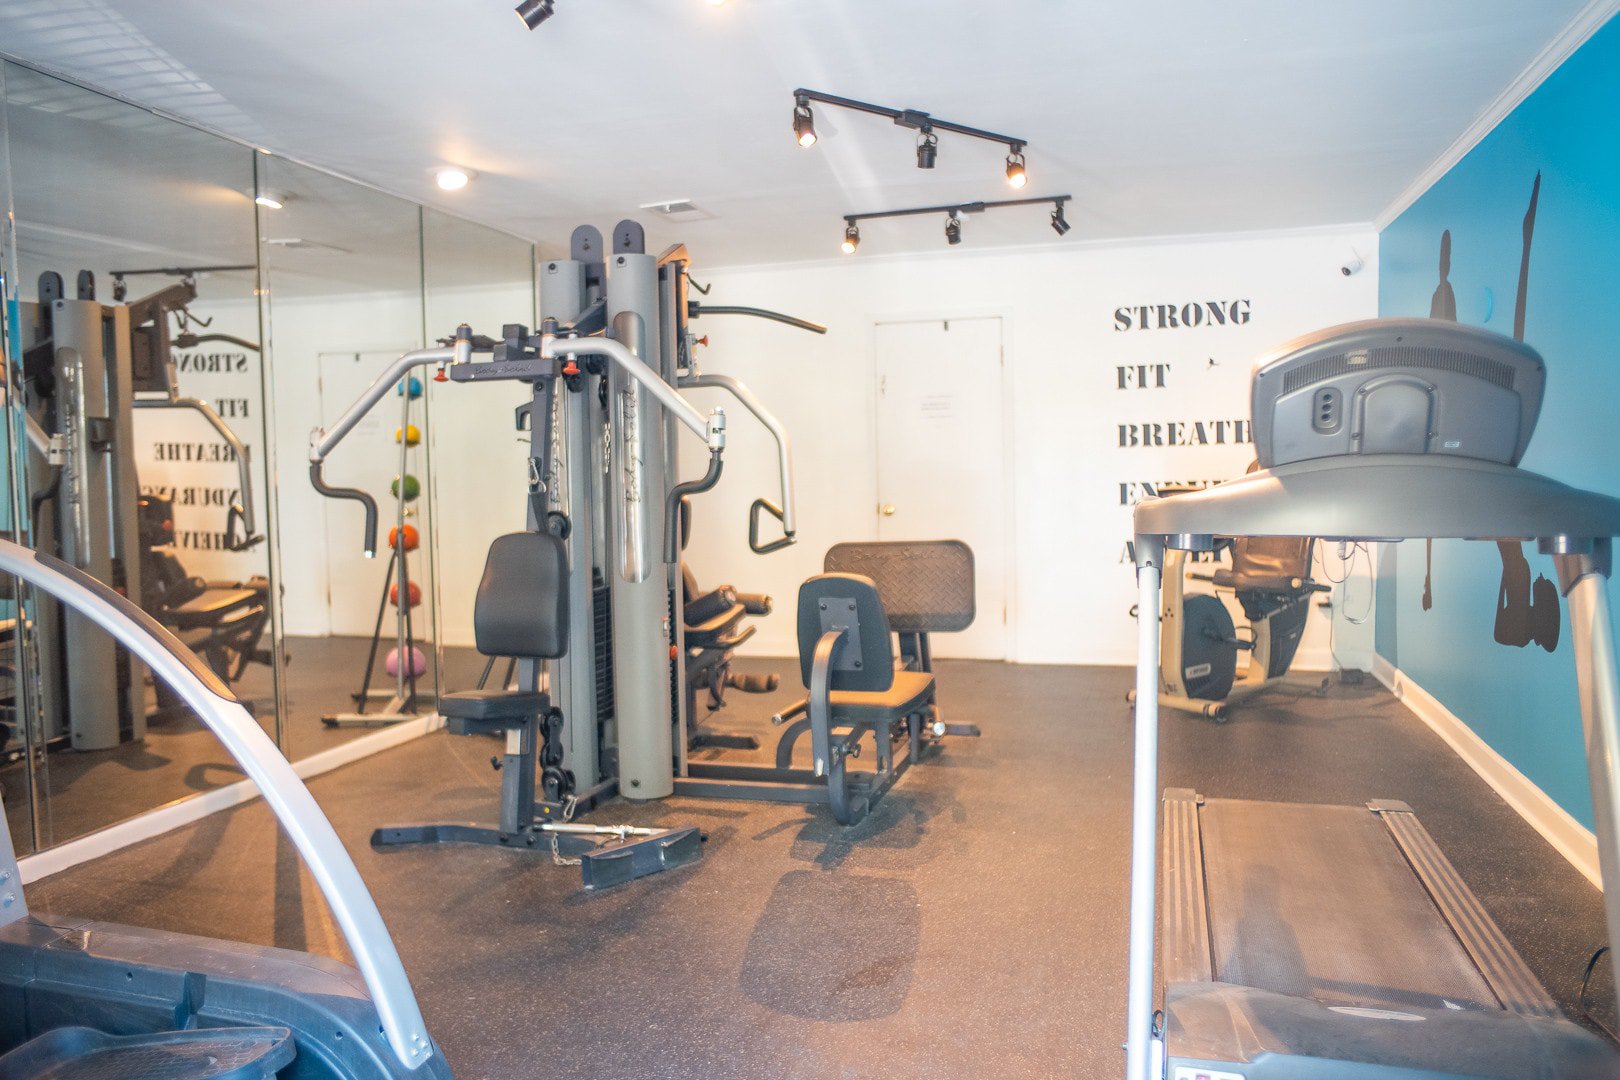 fitness center at Ashley Woods Apartments, located in the heart of Greensboro, North Carolina